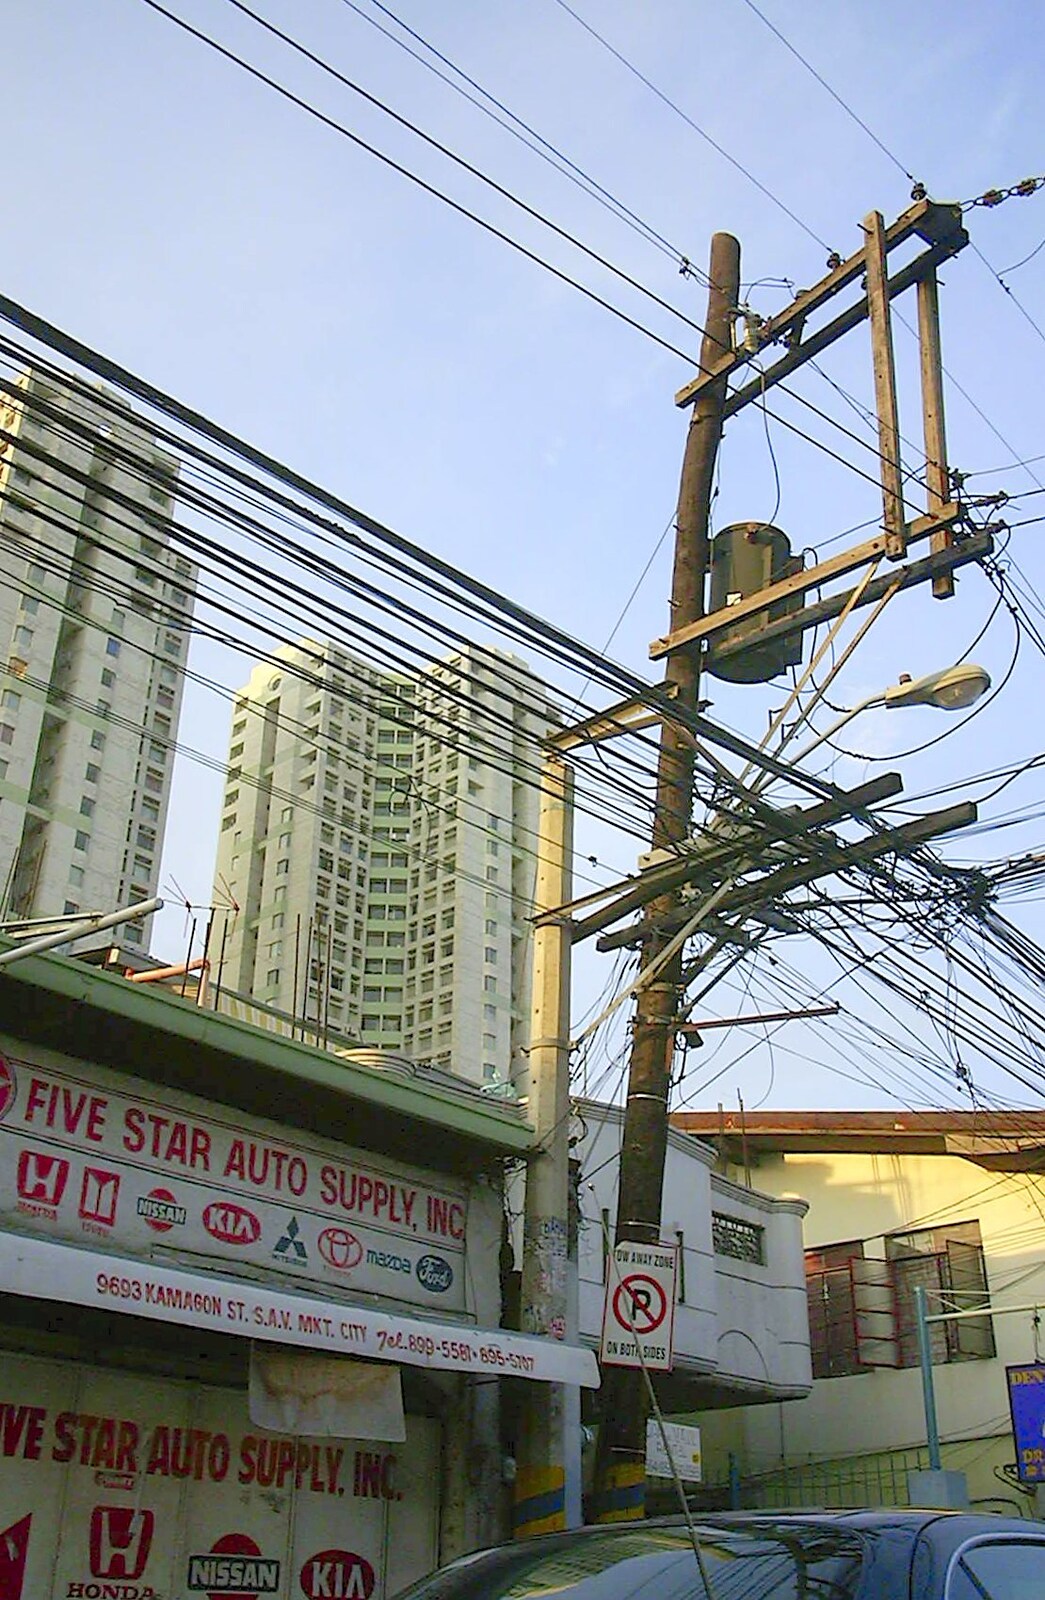 More impressive electrics from A Postcard From Manila: a Working Trip, Philippines - 9th July 2004